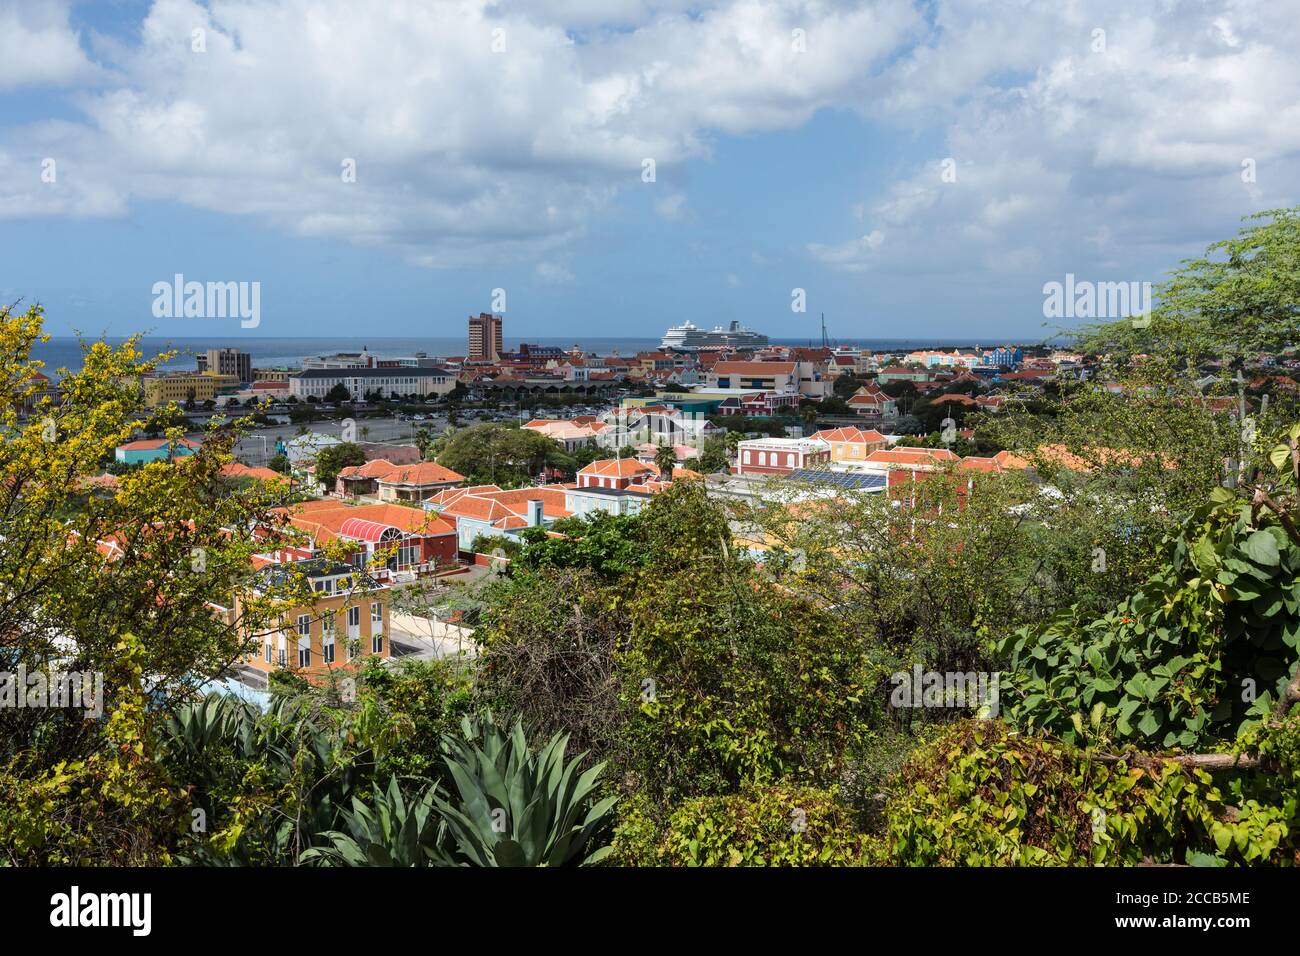 View of Willemstad, the capital of the Caribbean island nation of Curacao, from Sablica Hill.  The Historic Area of Willemstad, Inner City and Harbour Stock Photo